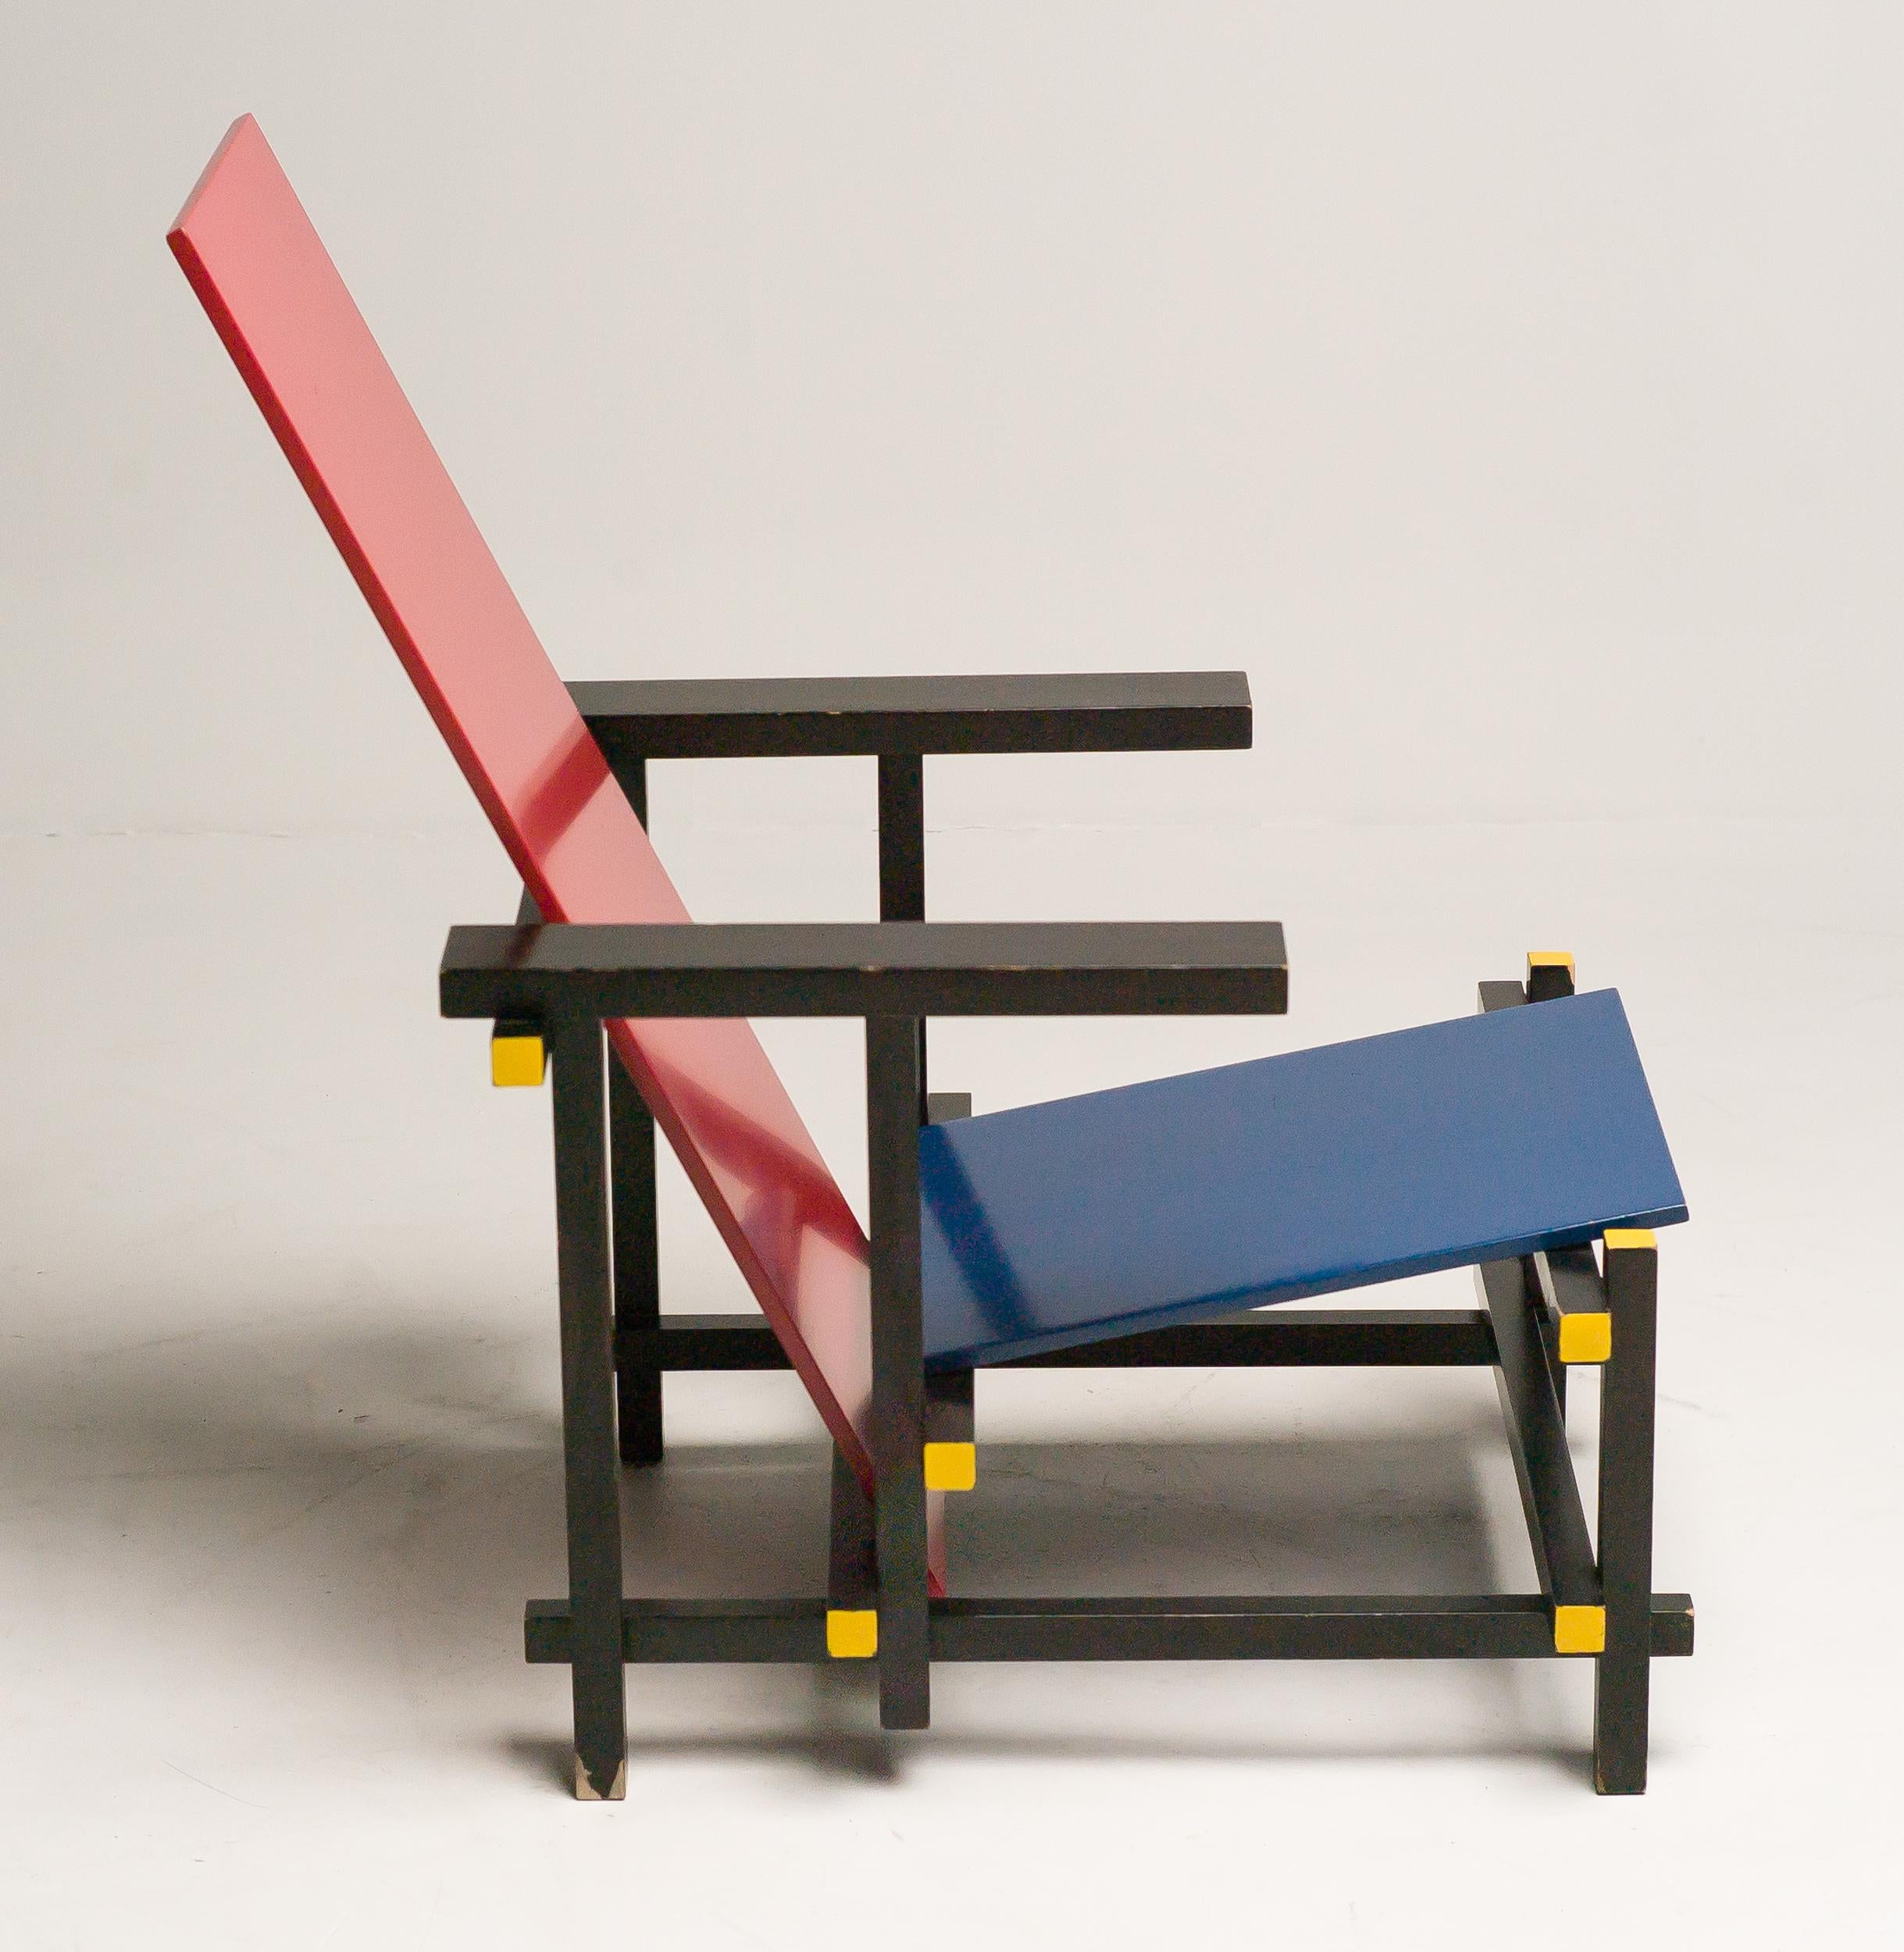 Armchair, red and blue by Rietveld, Cassina production, embossed number 2203.
This one is from the late 1970s.
Signed and numbered.